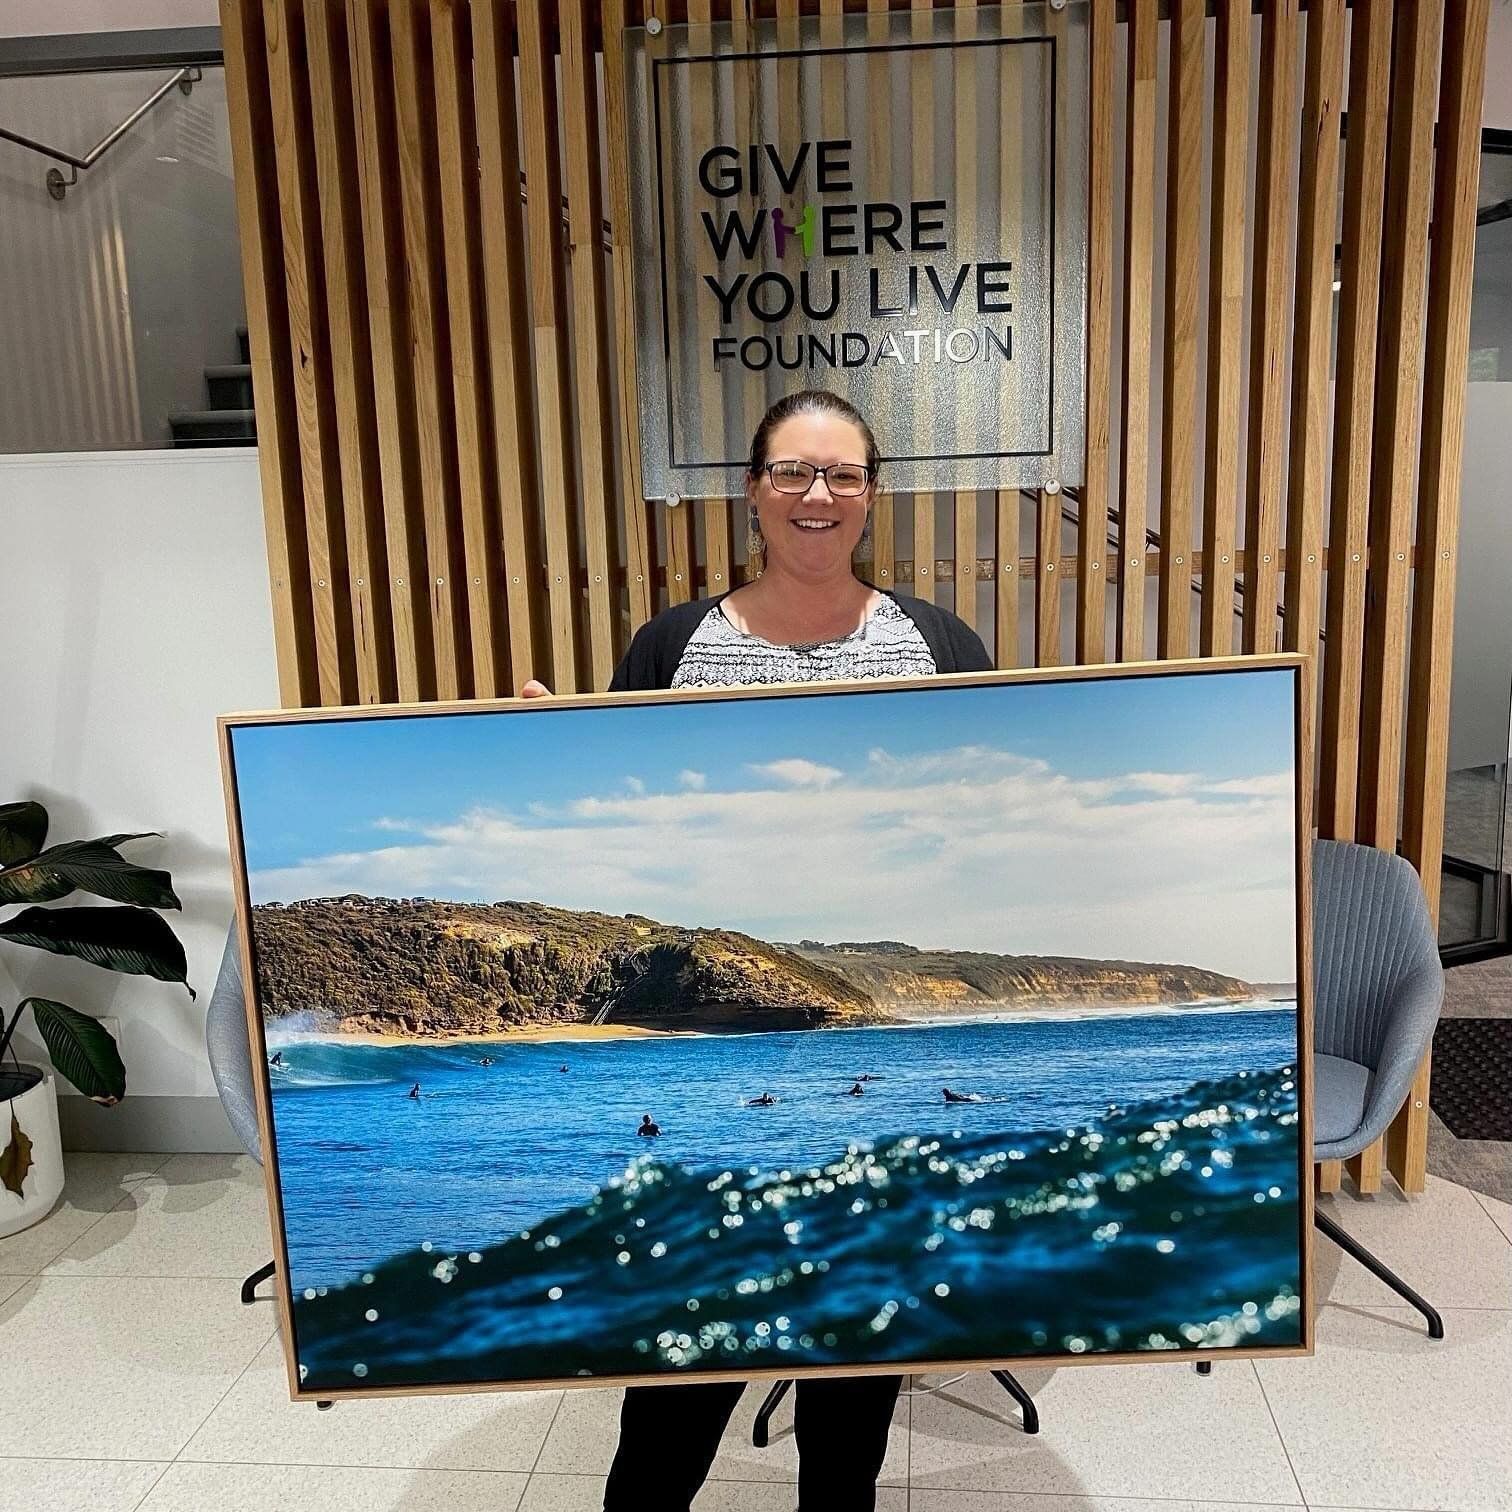 Big congrats to Emma who is the lucky winner of the Surf Coast Trek Raffle first prize 🥇- An original photograph of #BellsBeach by @asnowman1 

The raffle helped us raise $2600 - how good is that! 

Thank you to @bellsfineart and Adam Snow, all our 